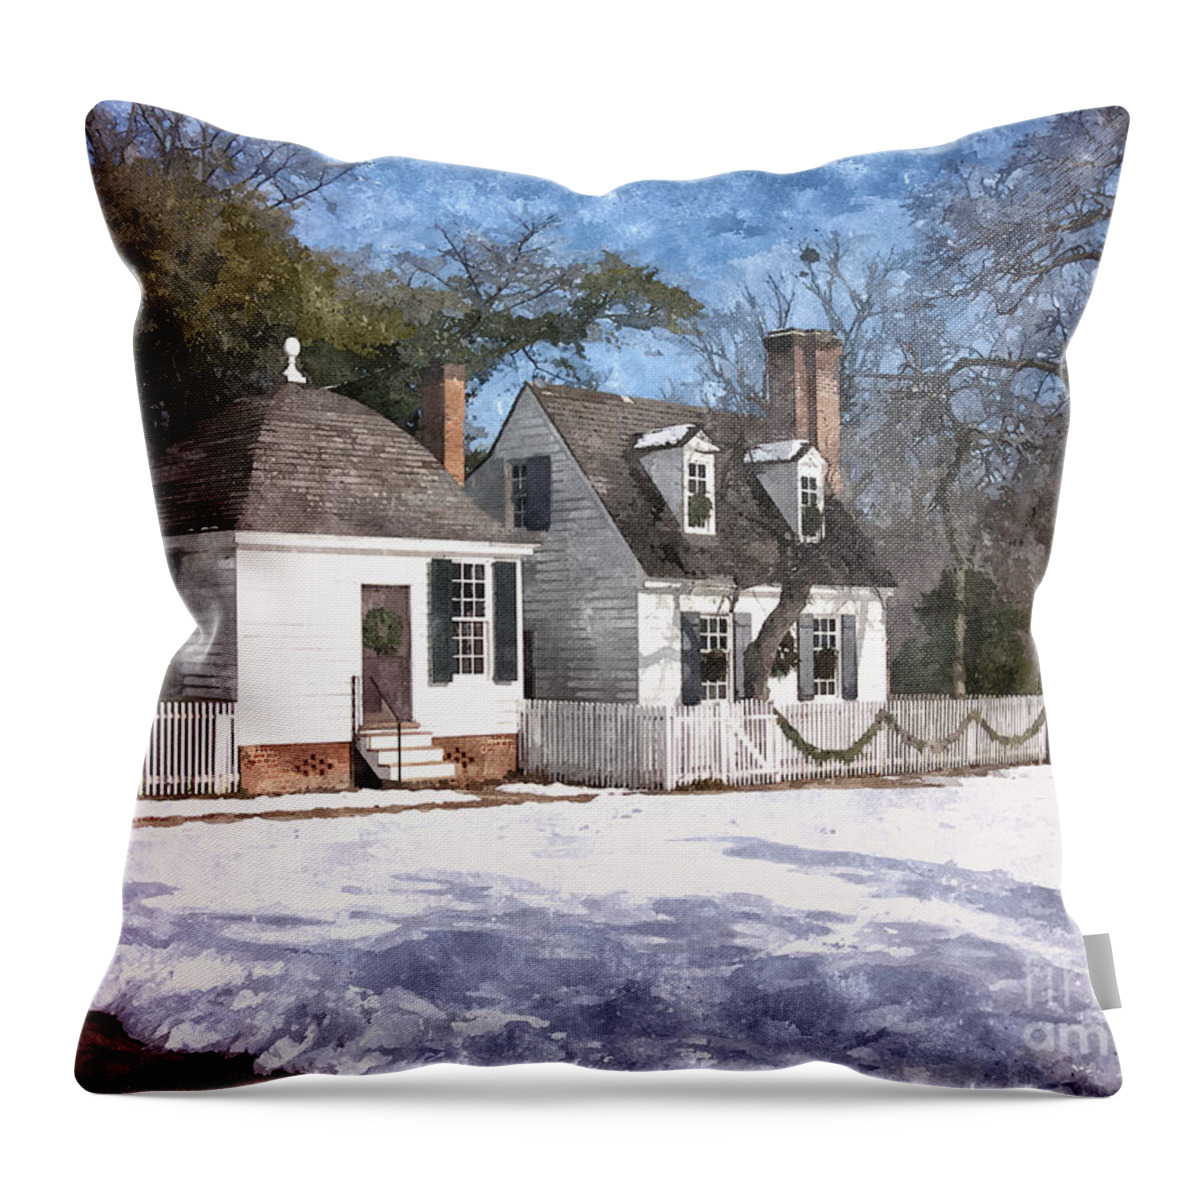 Cottage Throw Pillow featuring the painting Yule Cottage by Shari Nees